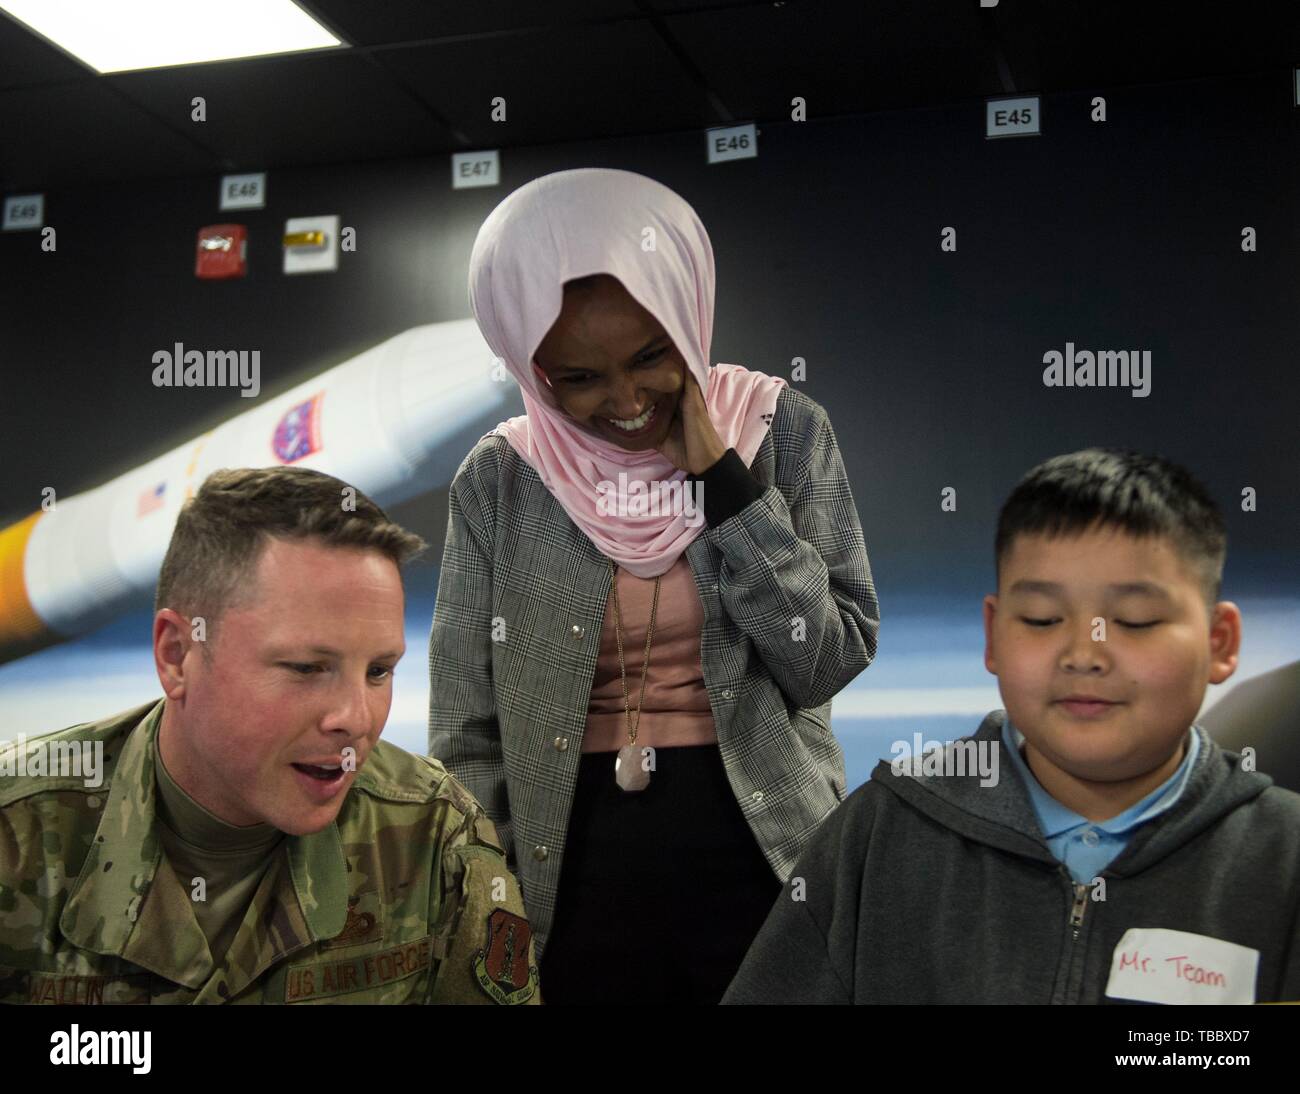 U.S. Rep. Ilhan Omar of Minnesota, center, with children from the Battle Creek Elementary School participating in STARBASE Minnesota during a visit to the the 133rd Airlift Wing May 29, 2019 in St. Paul, Minnesota. STARBASE is an educational program placing students in the community to learn about science and engineering to promote STEM education. Stock Photo